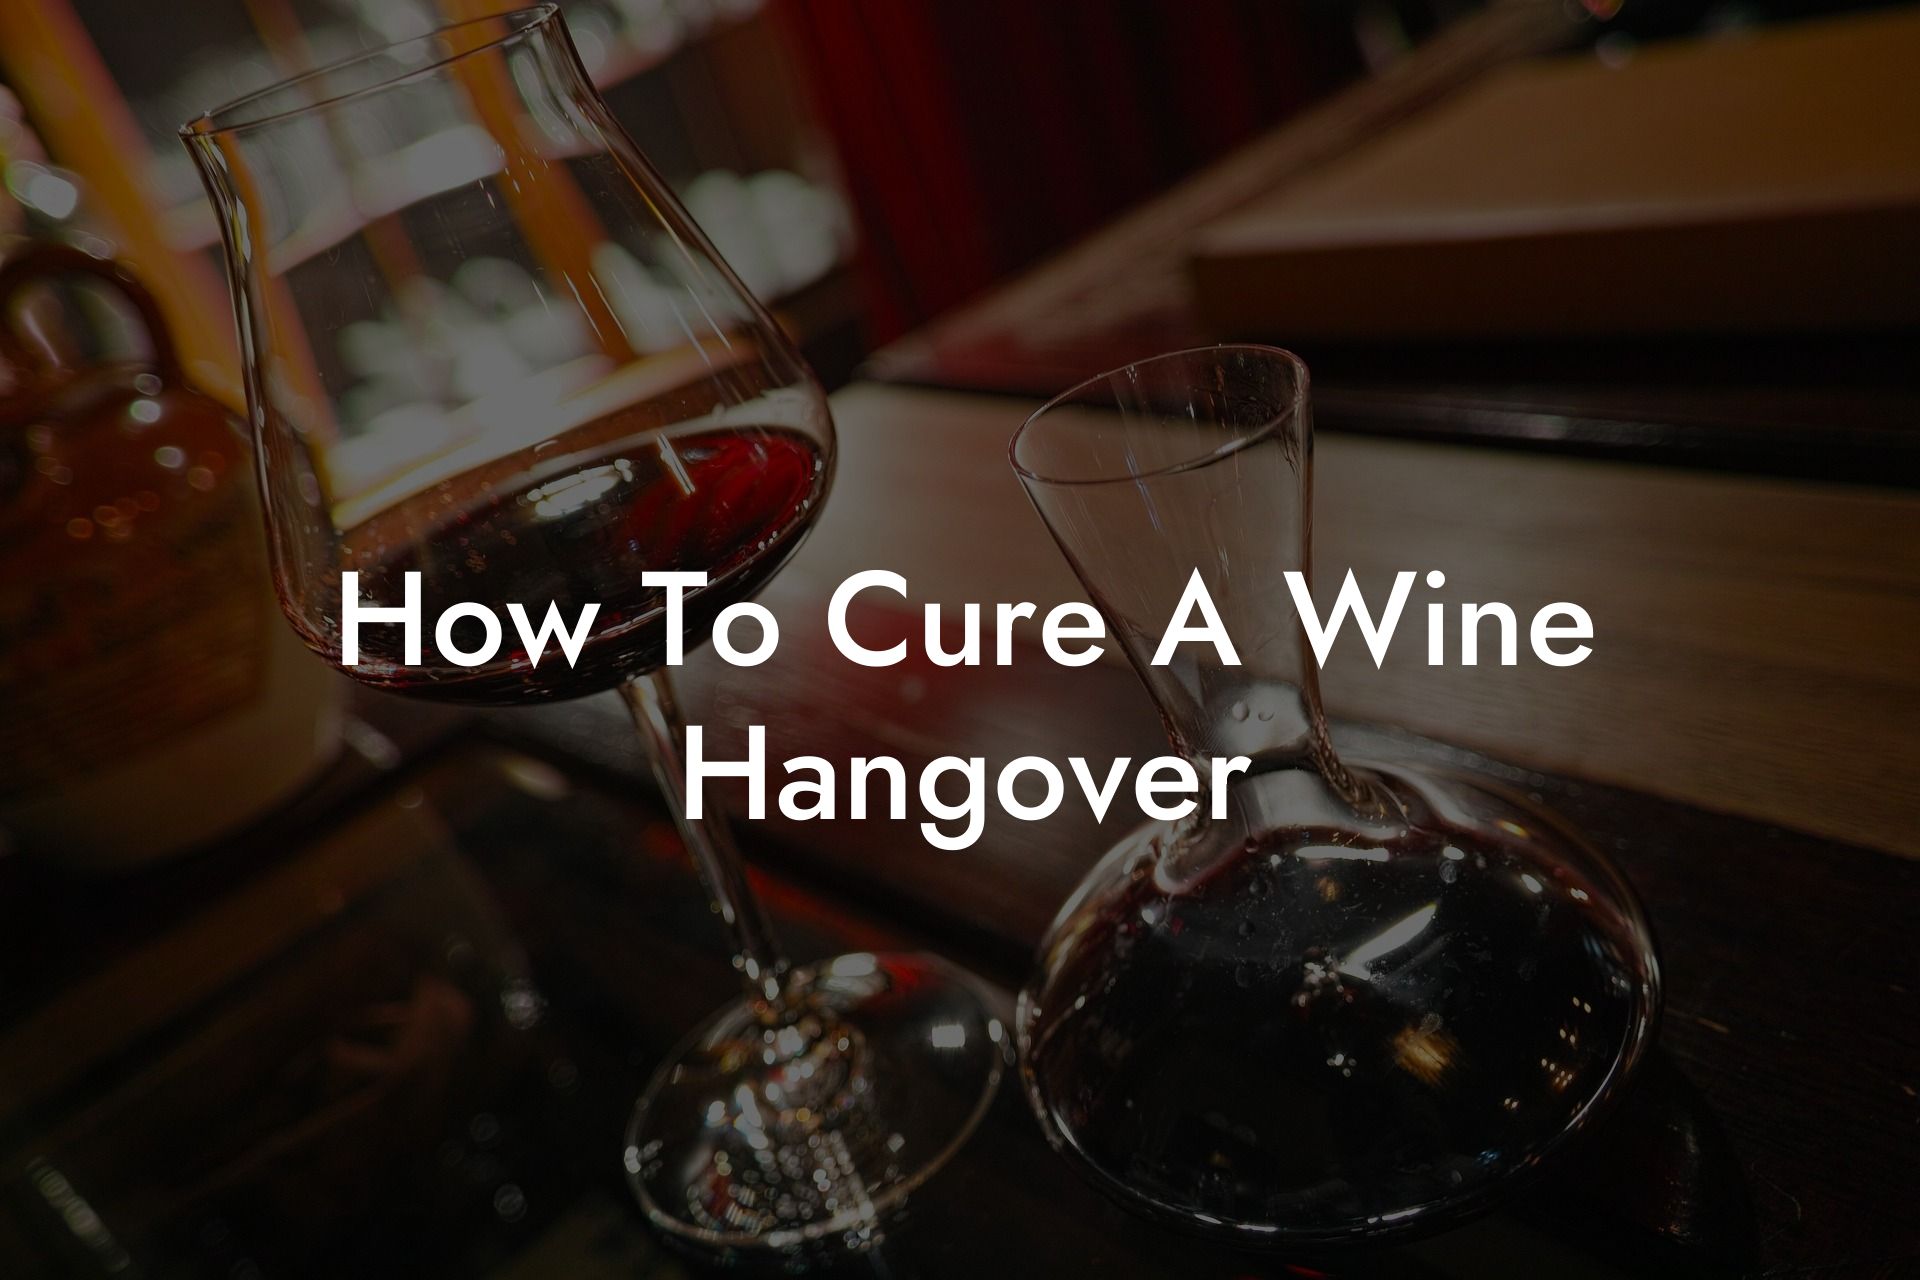 How To Cure A Wine Hangover